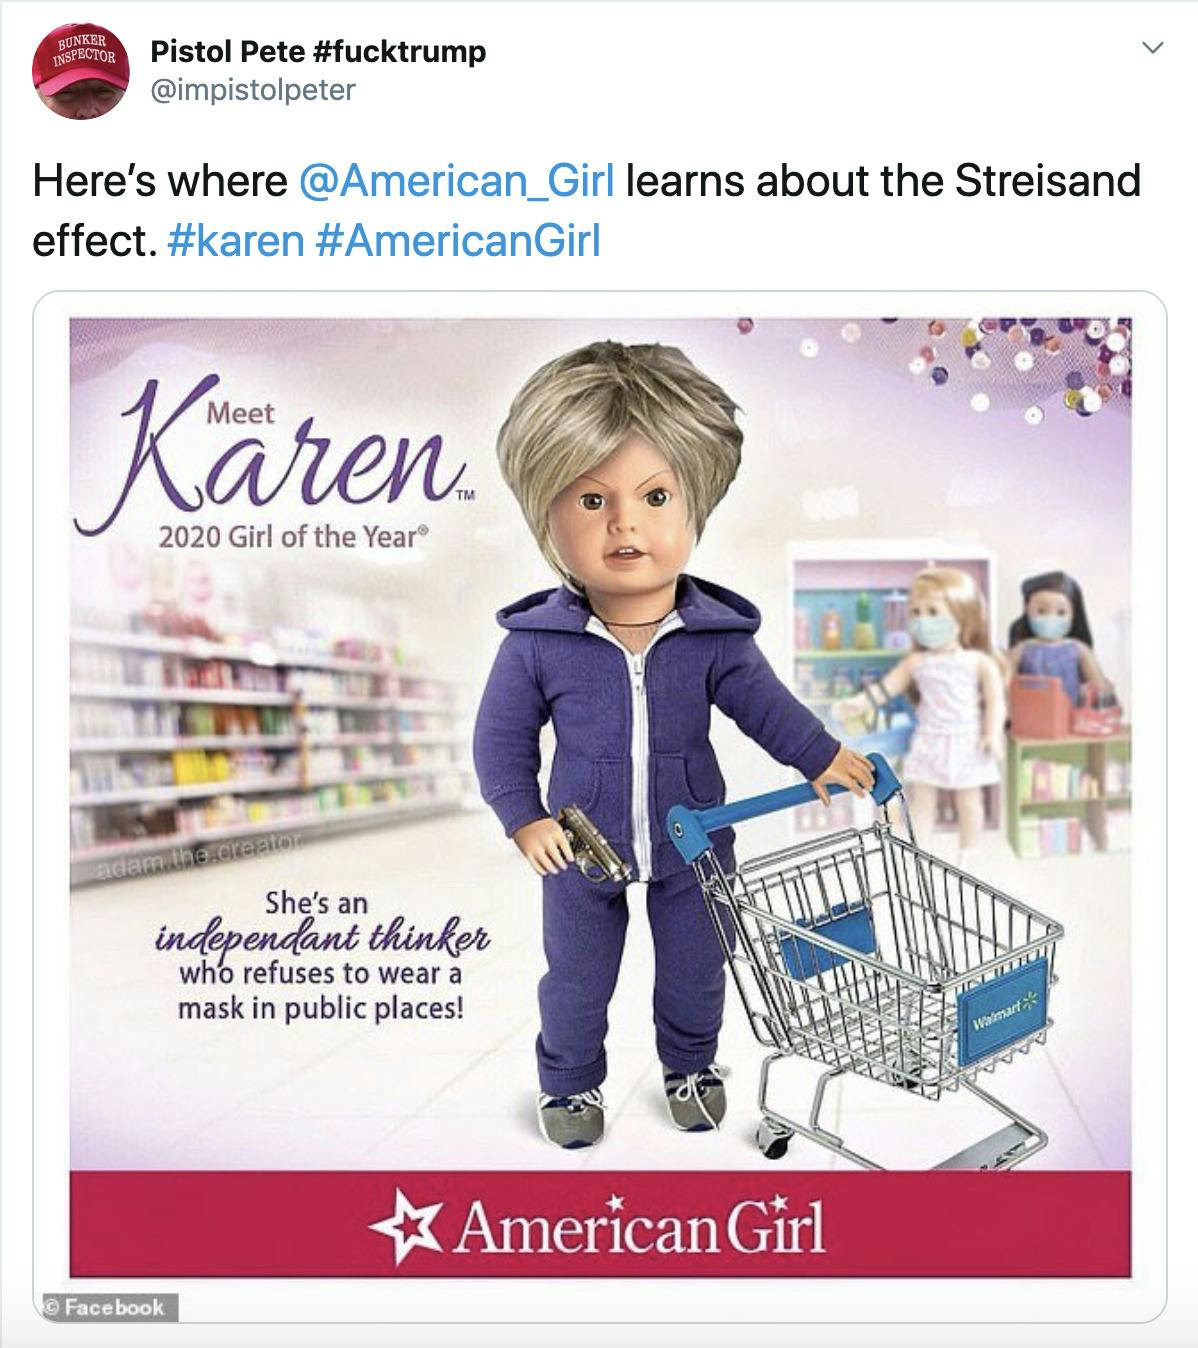 "Here’s where  @American_Girl  learns about the Streisand effect. #karen #AmericanGirl" Padilla's meme